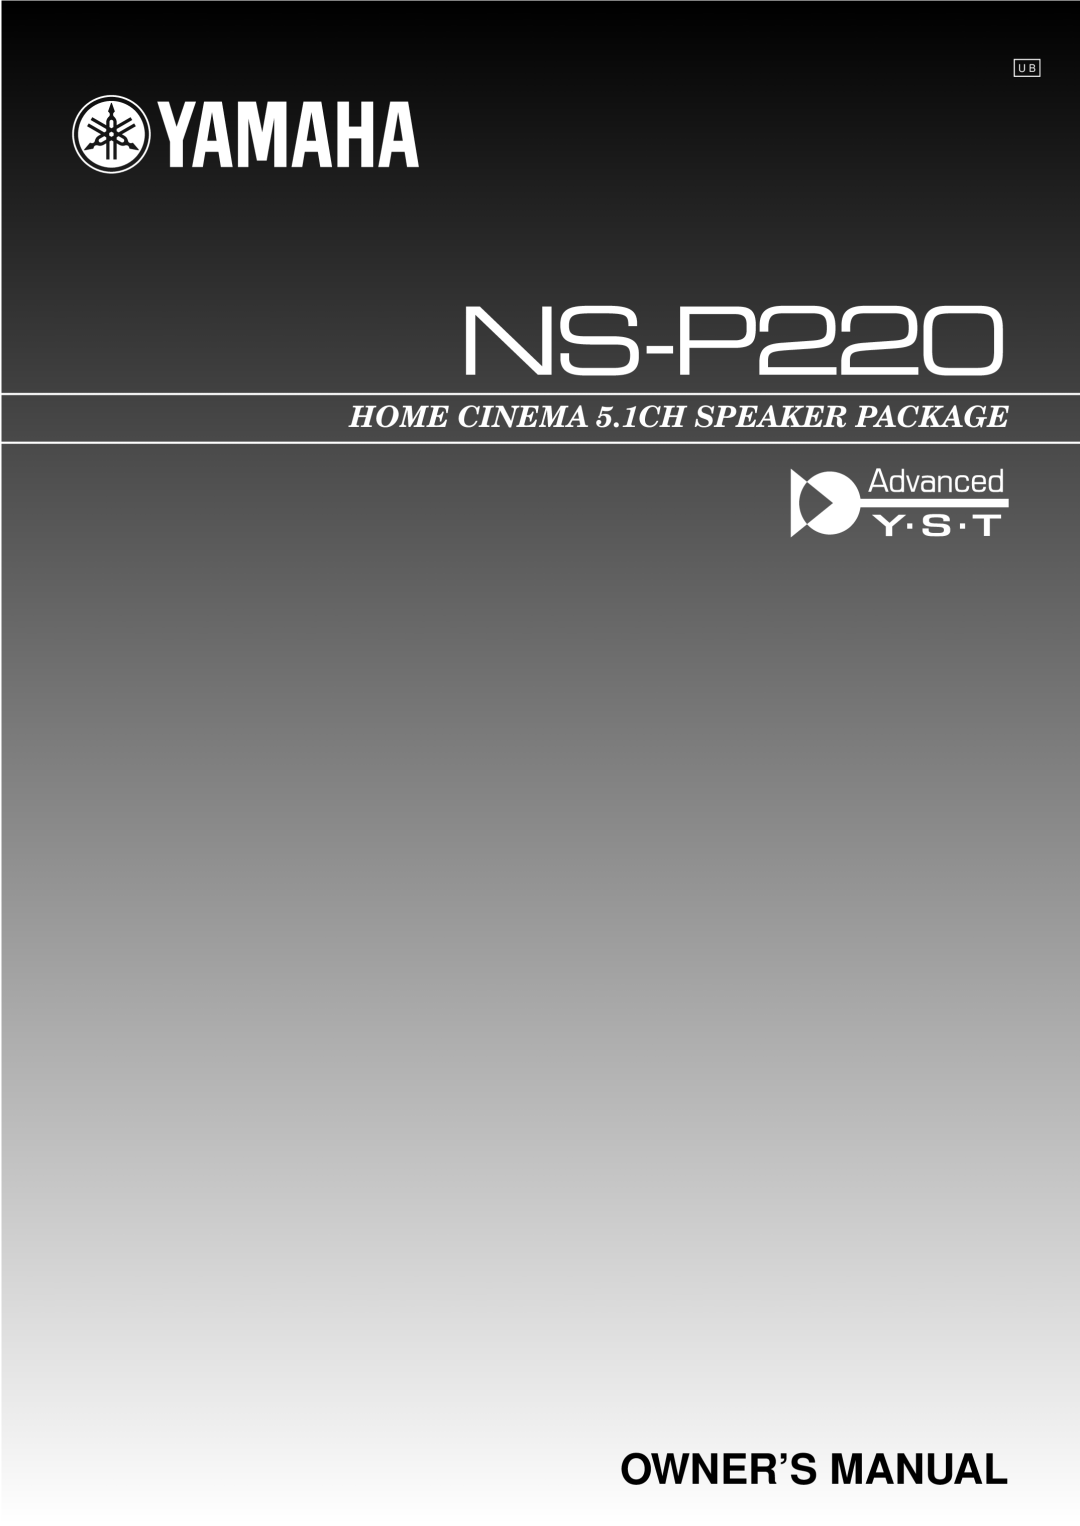 Yamaha NS-P220 owner manual HOME CINEMA 5.1CH SPEAKER PACKAGE 